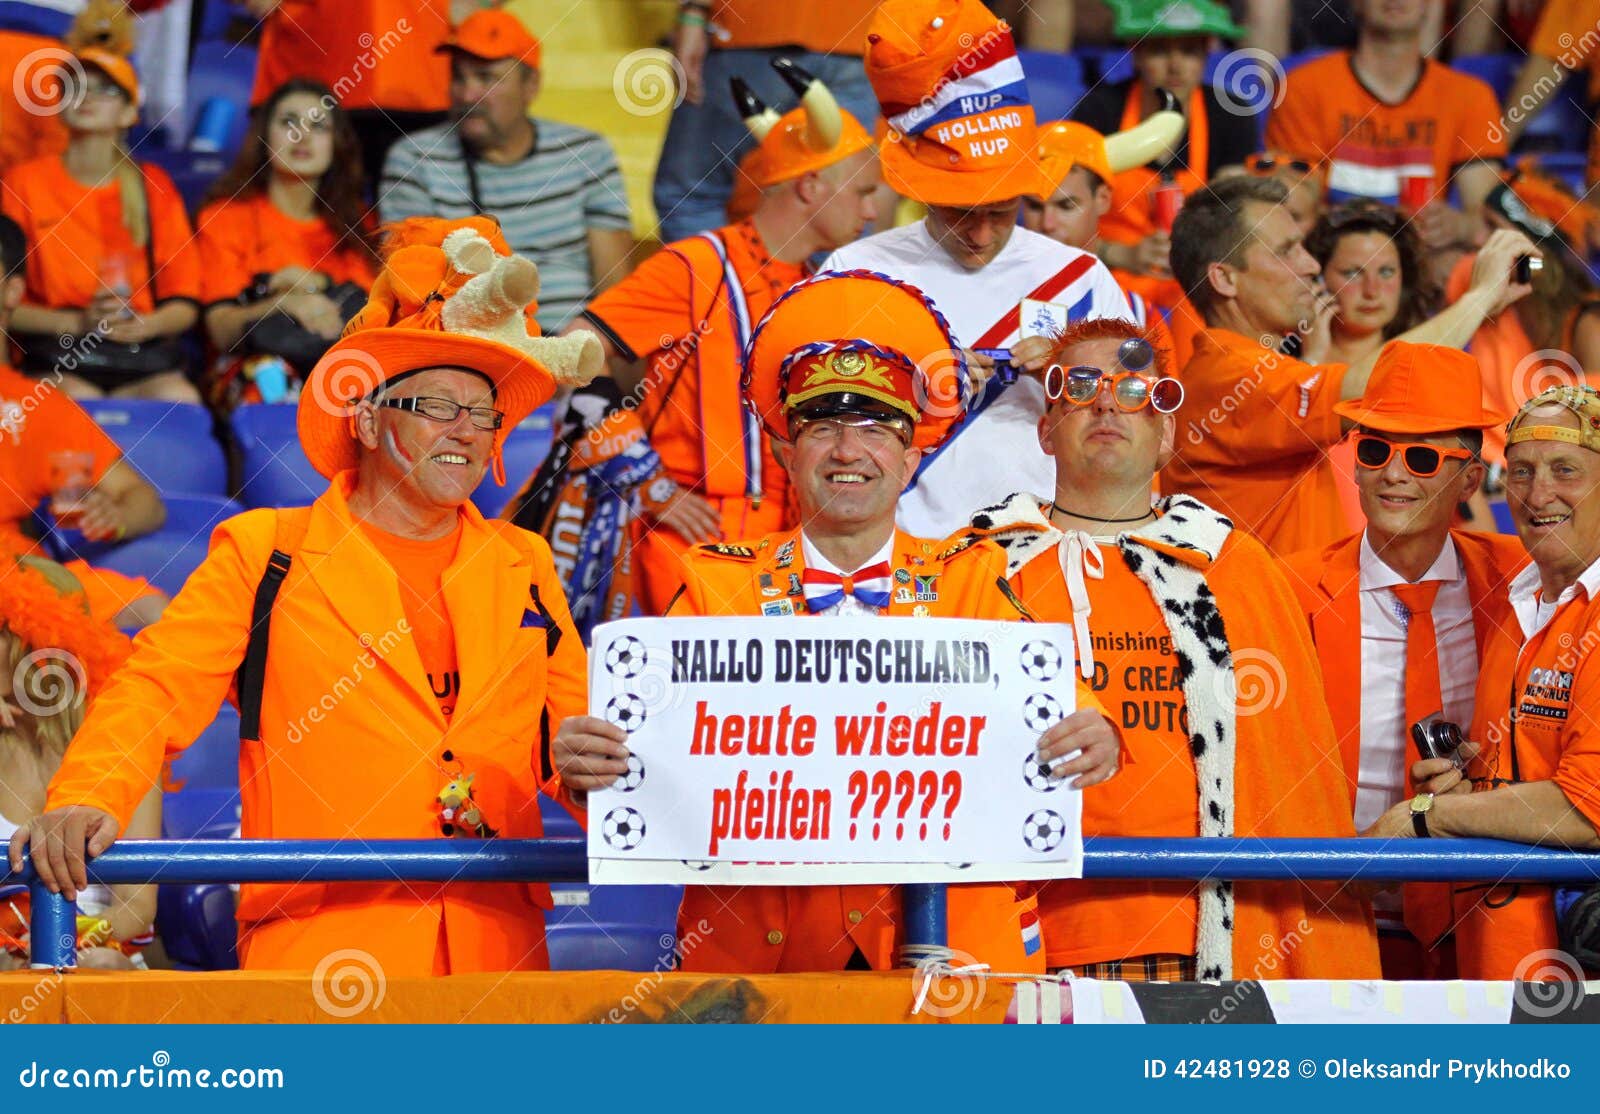 Dutch soccer fans editorial stock photo. Image of celebrate - 42481928